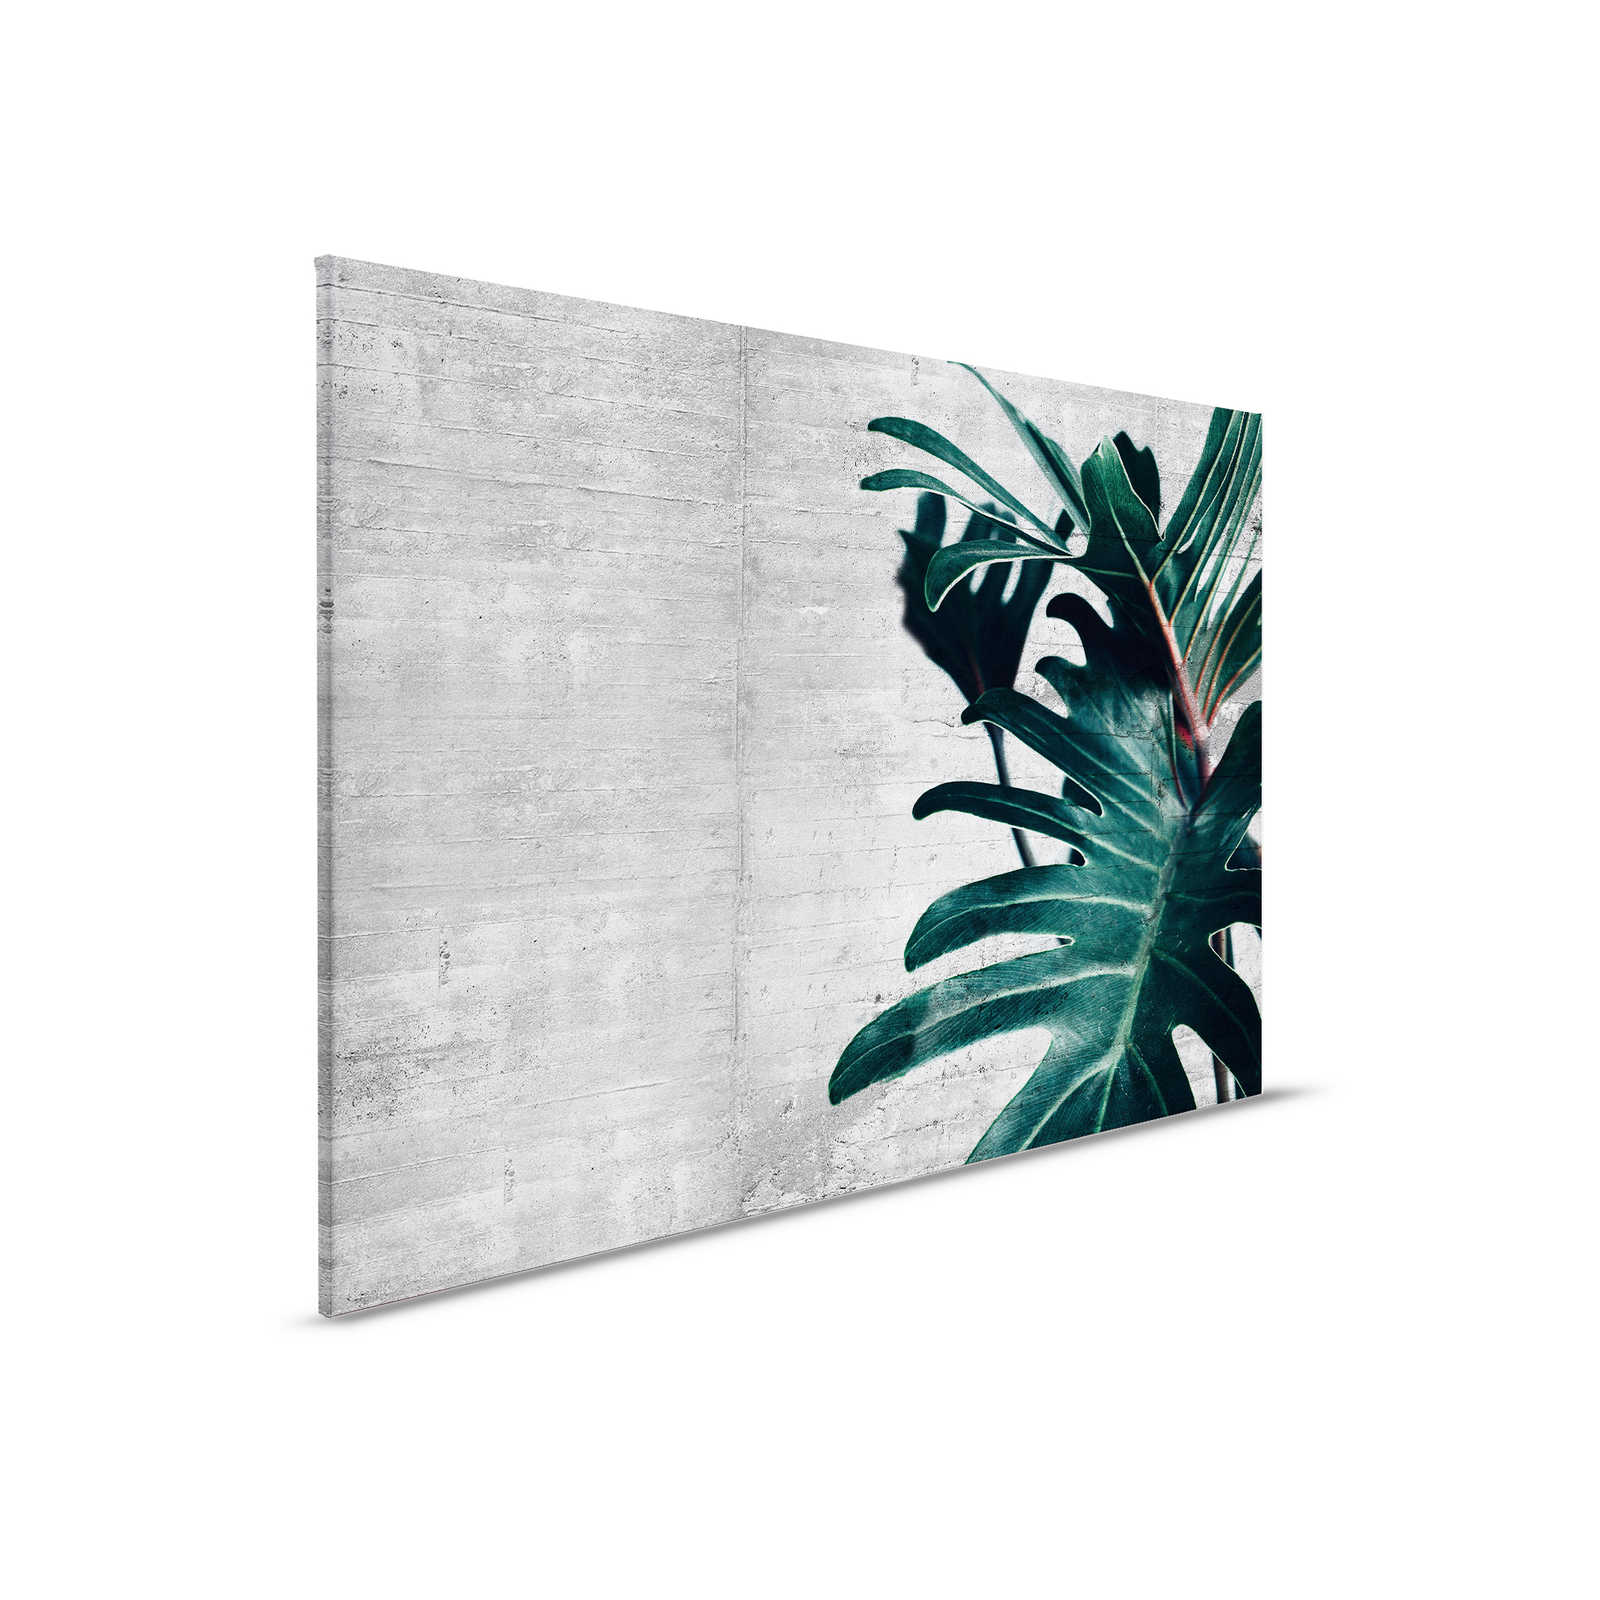 Canvas painting with window leaf in front of concrete look wall - 0.90 m x 0.60 m
